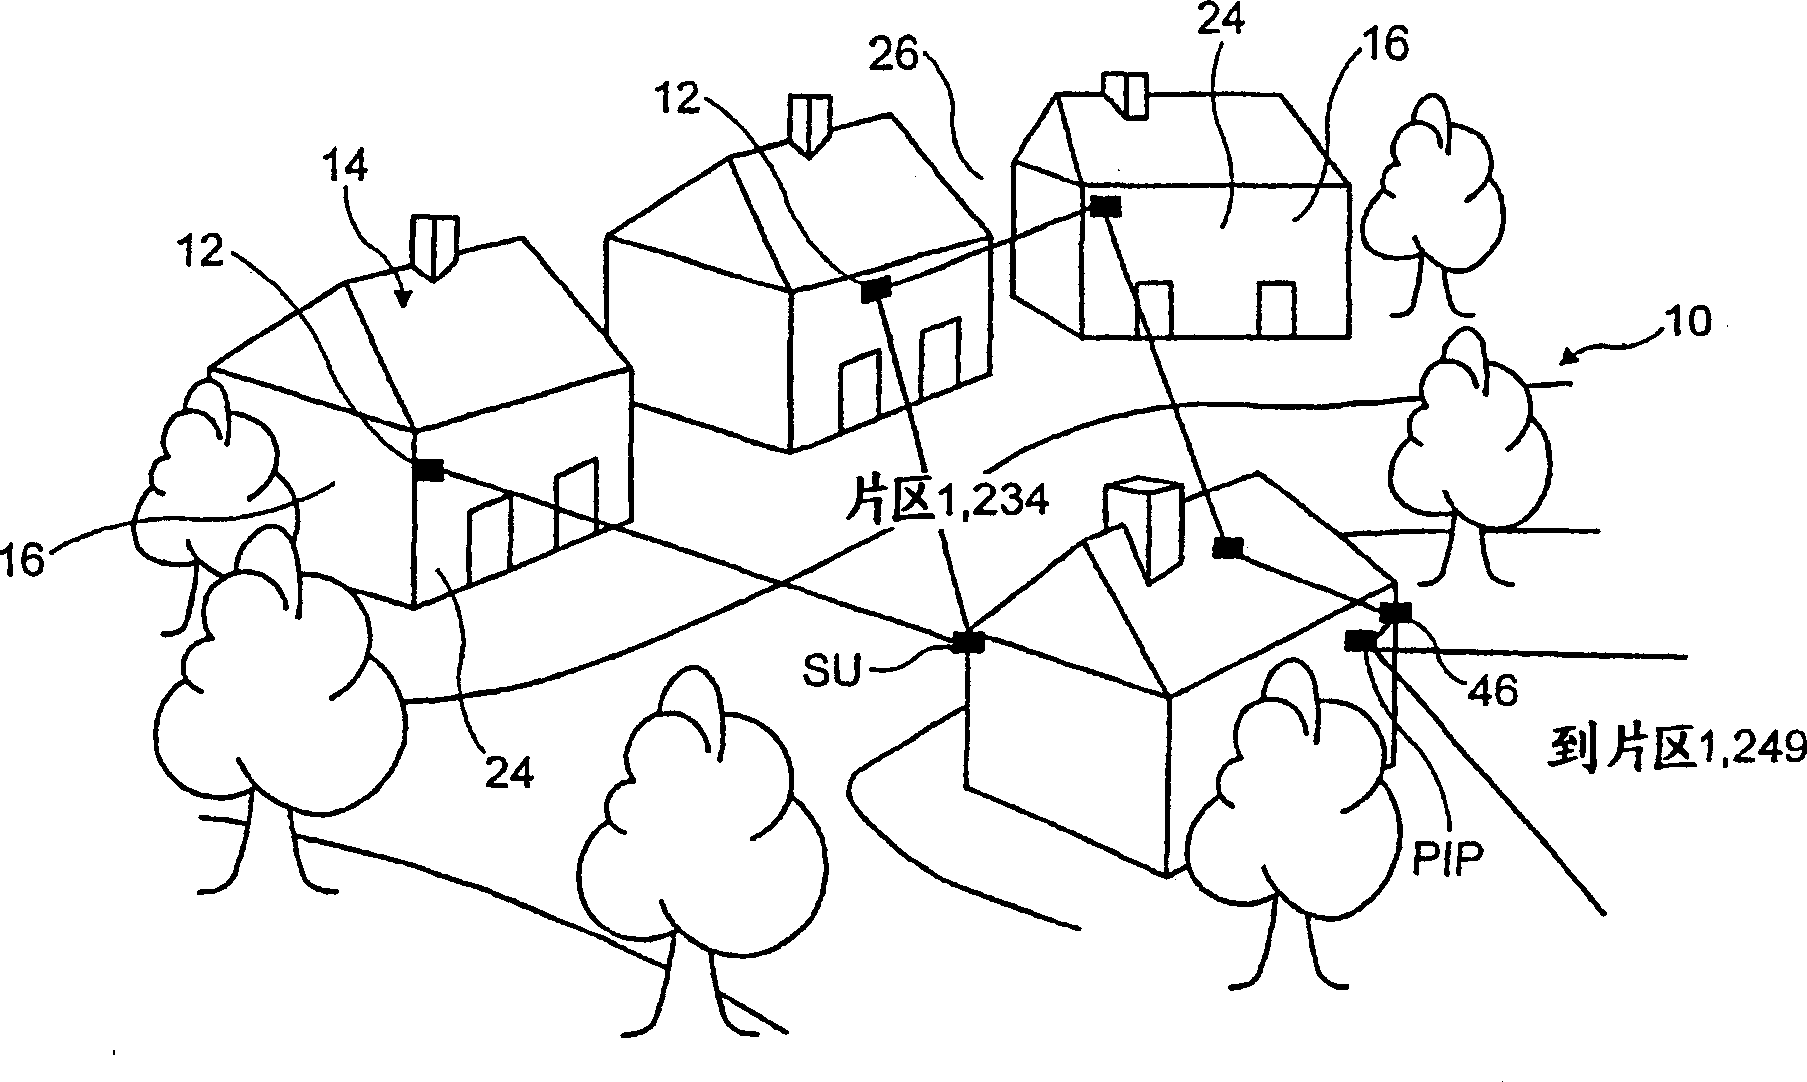 System and method for mass broadband communications